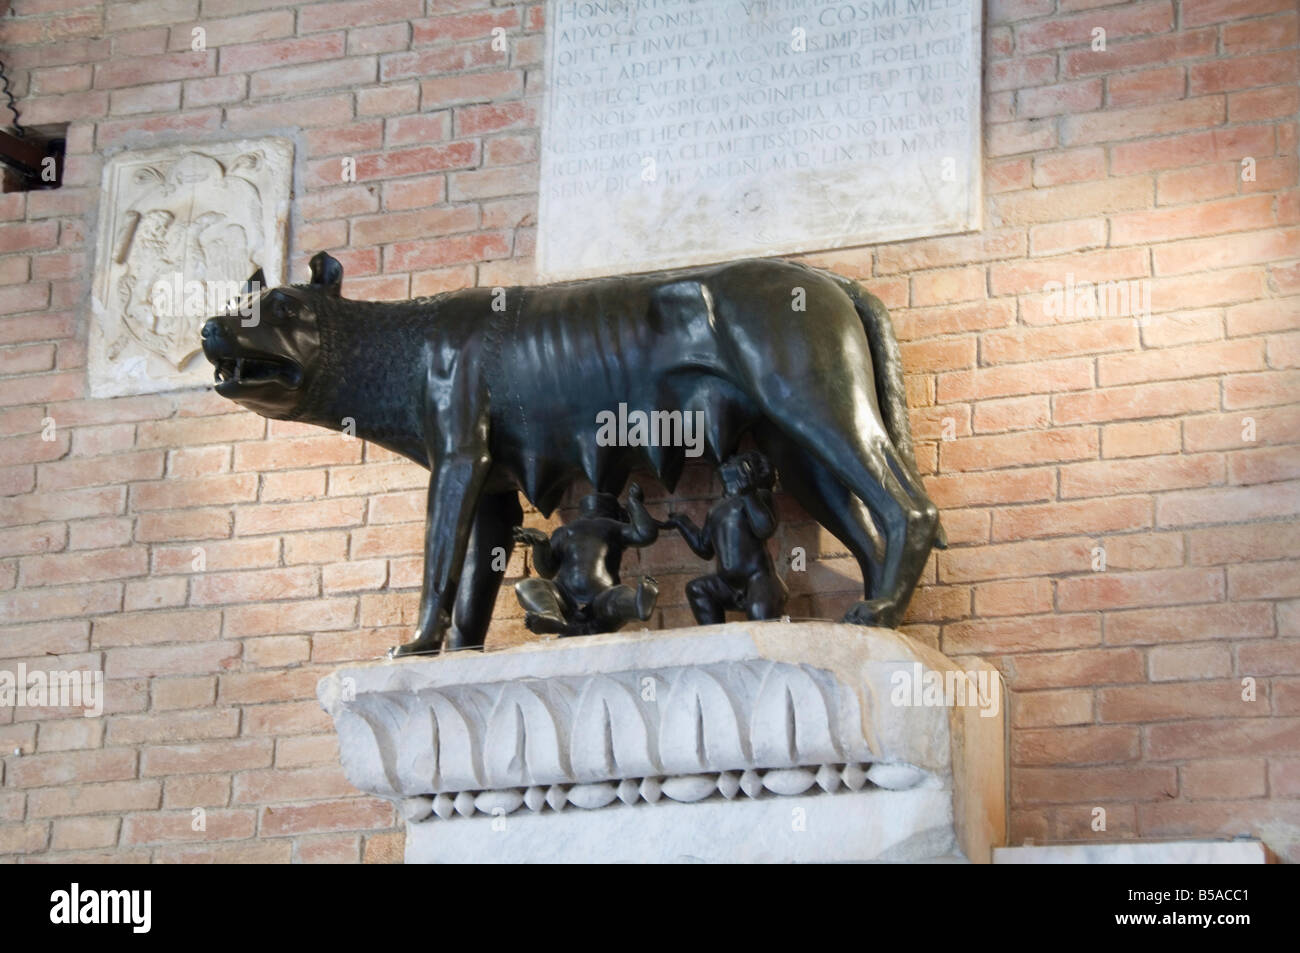 Statue depicting Romulus and Remus and the she-wolf, in the entrance to the Palazzo Pubblico, Siena, Tuscany, Italy, Europe Stock Photo